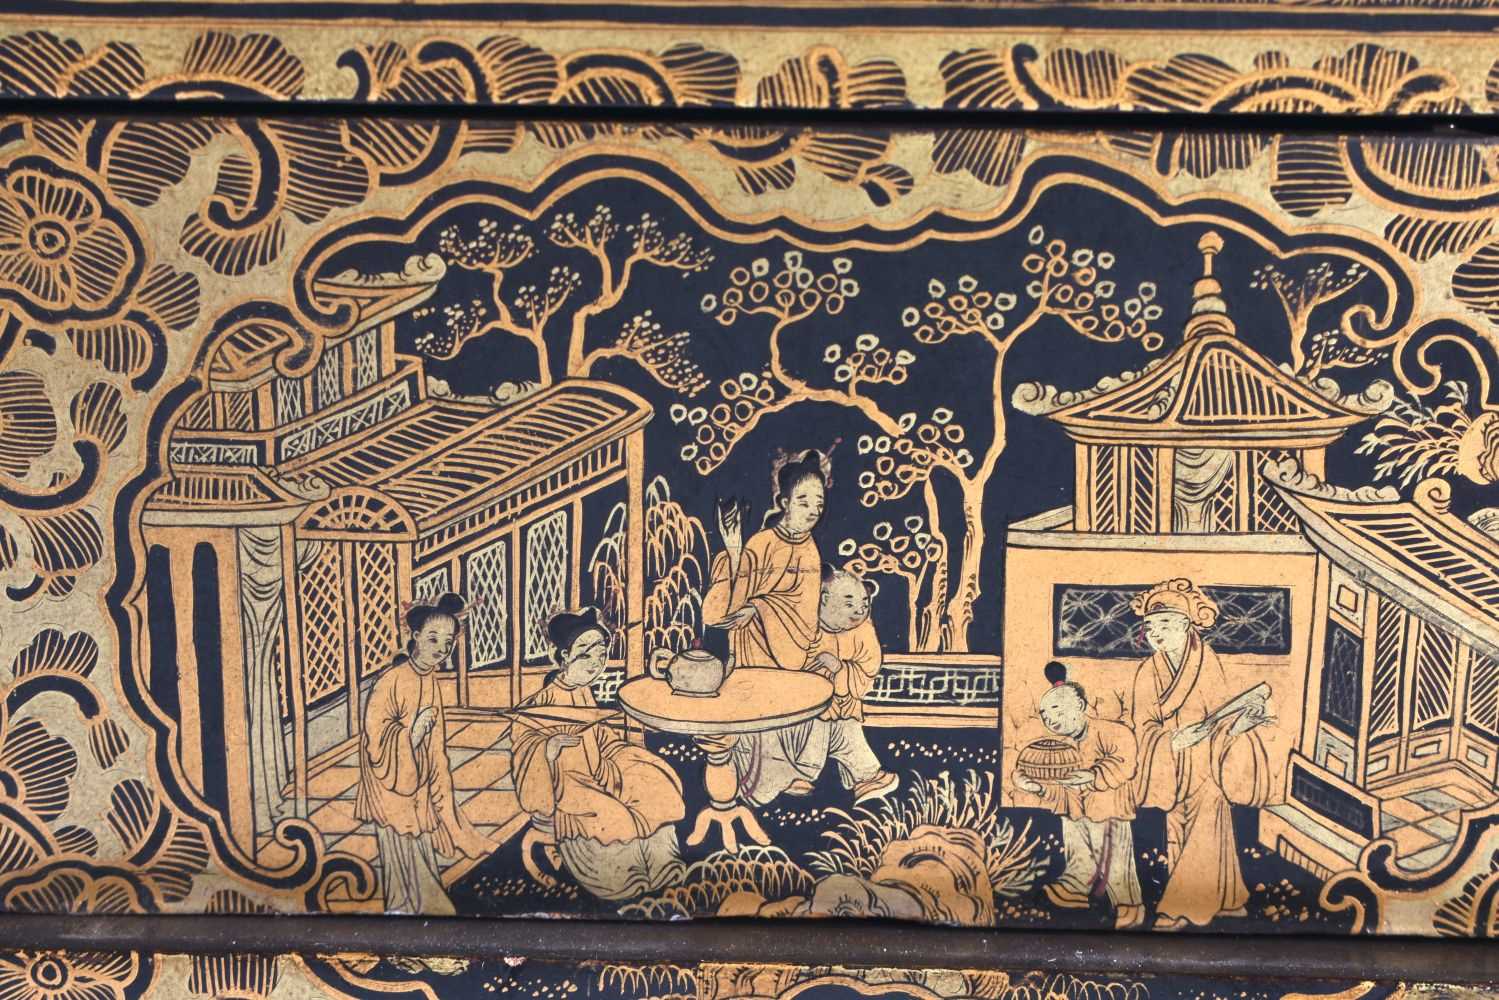 A FINE LATE 18TH/19TH CENTURY CHINESE EXPORT BLACK AND GOLD LACQUER SEWING CASKET Mid Qing, - Image 2 of 13